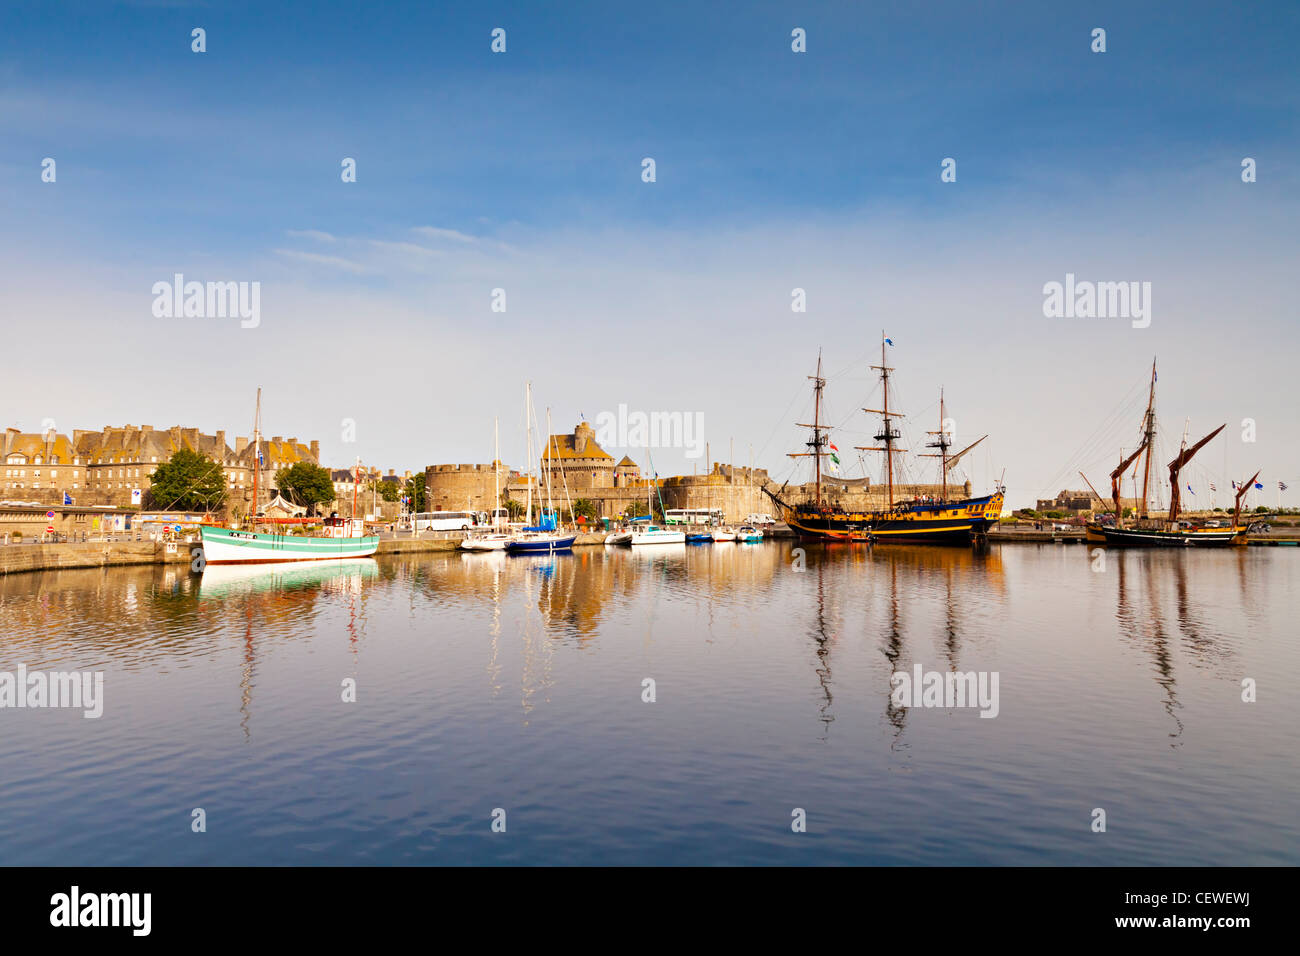 Part of the inner harbour of Saint-Malo in Brittany, France. Stock Photo